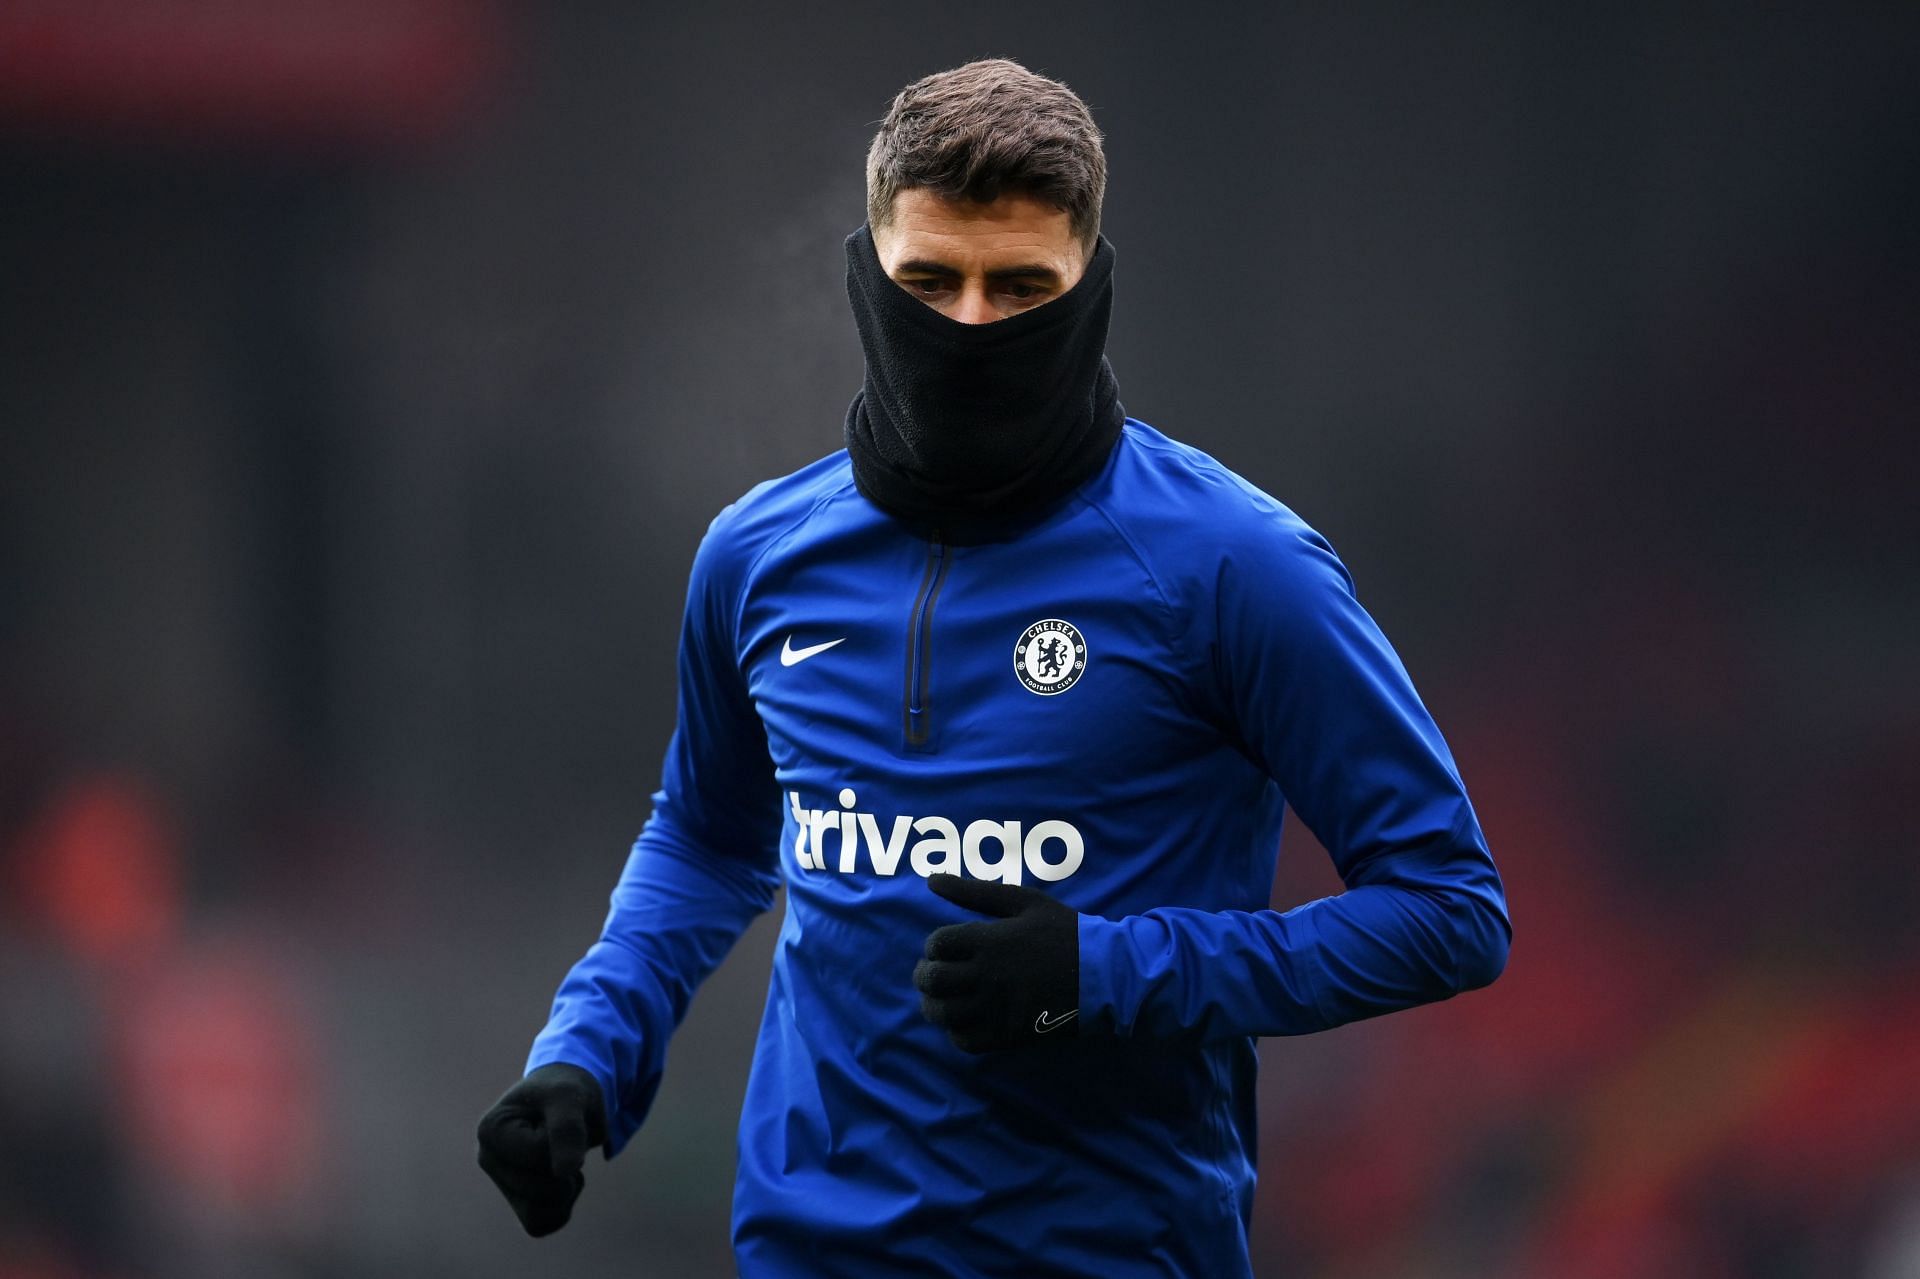 Jorginho completed his move to the Emirates on deadline day.